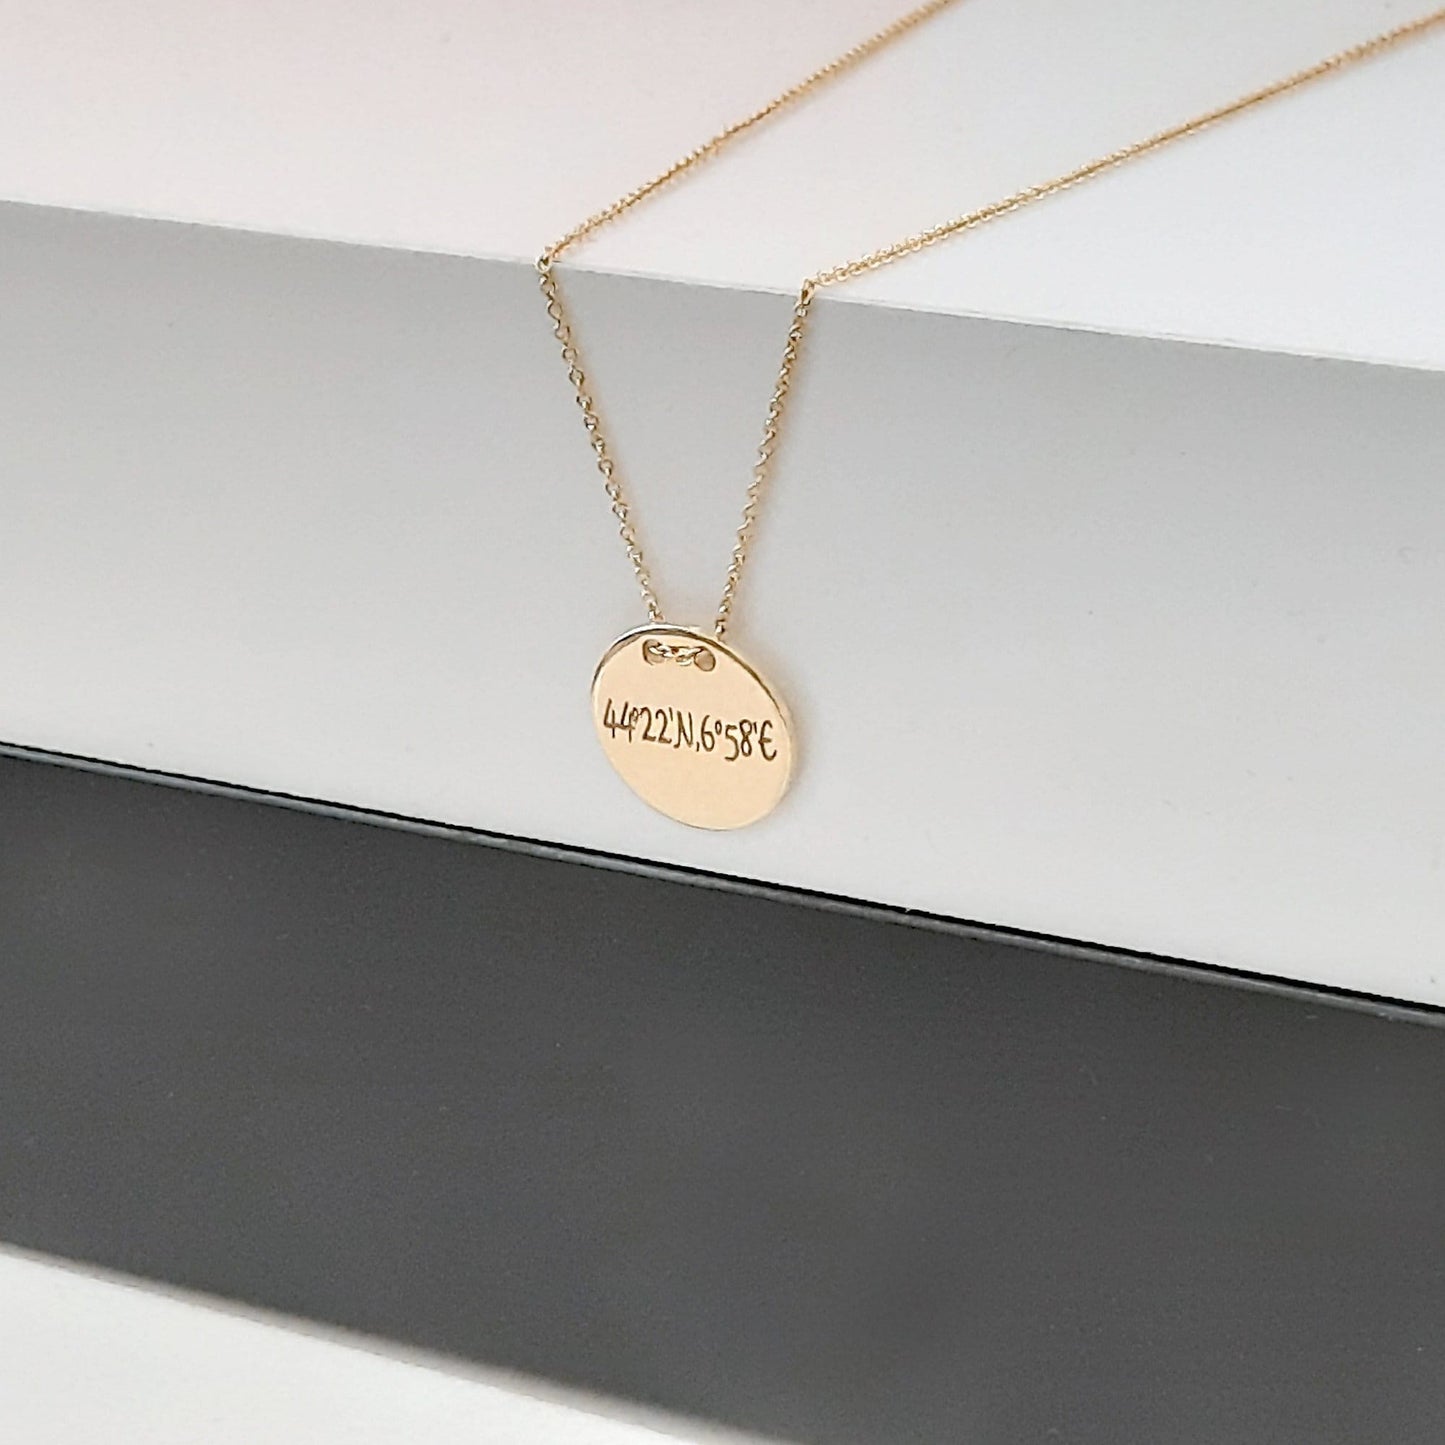 Gold Disk Necklace / Initial Disc Necklace / Personalized Disc Necklace Customized  Bridesmaid Gift, 14k Solid Gold Unique layered necklace